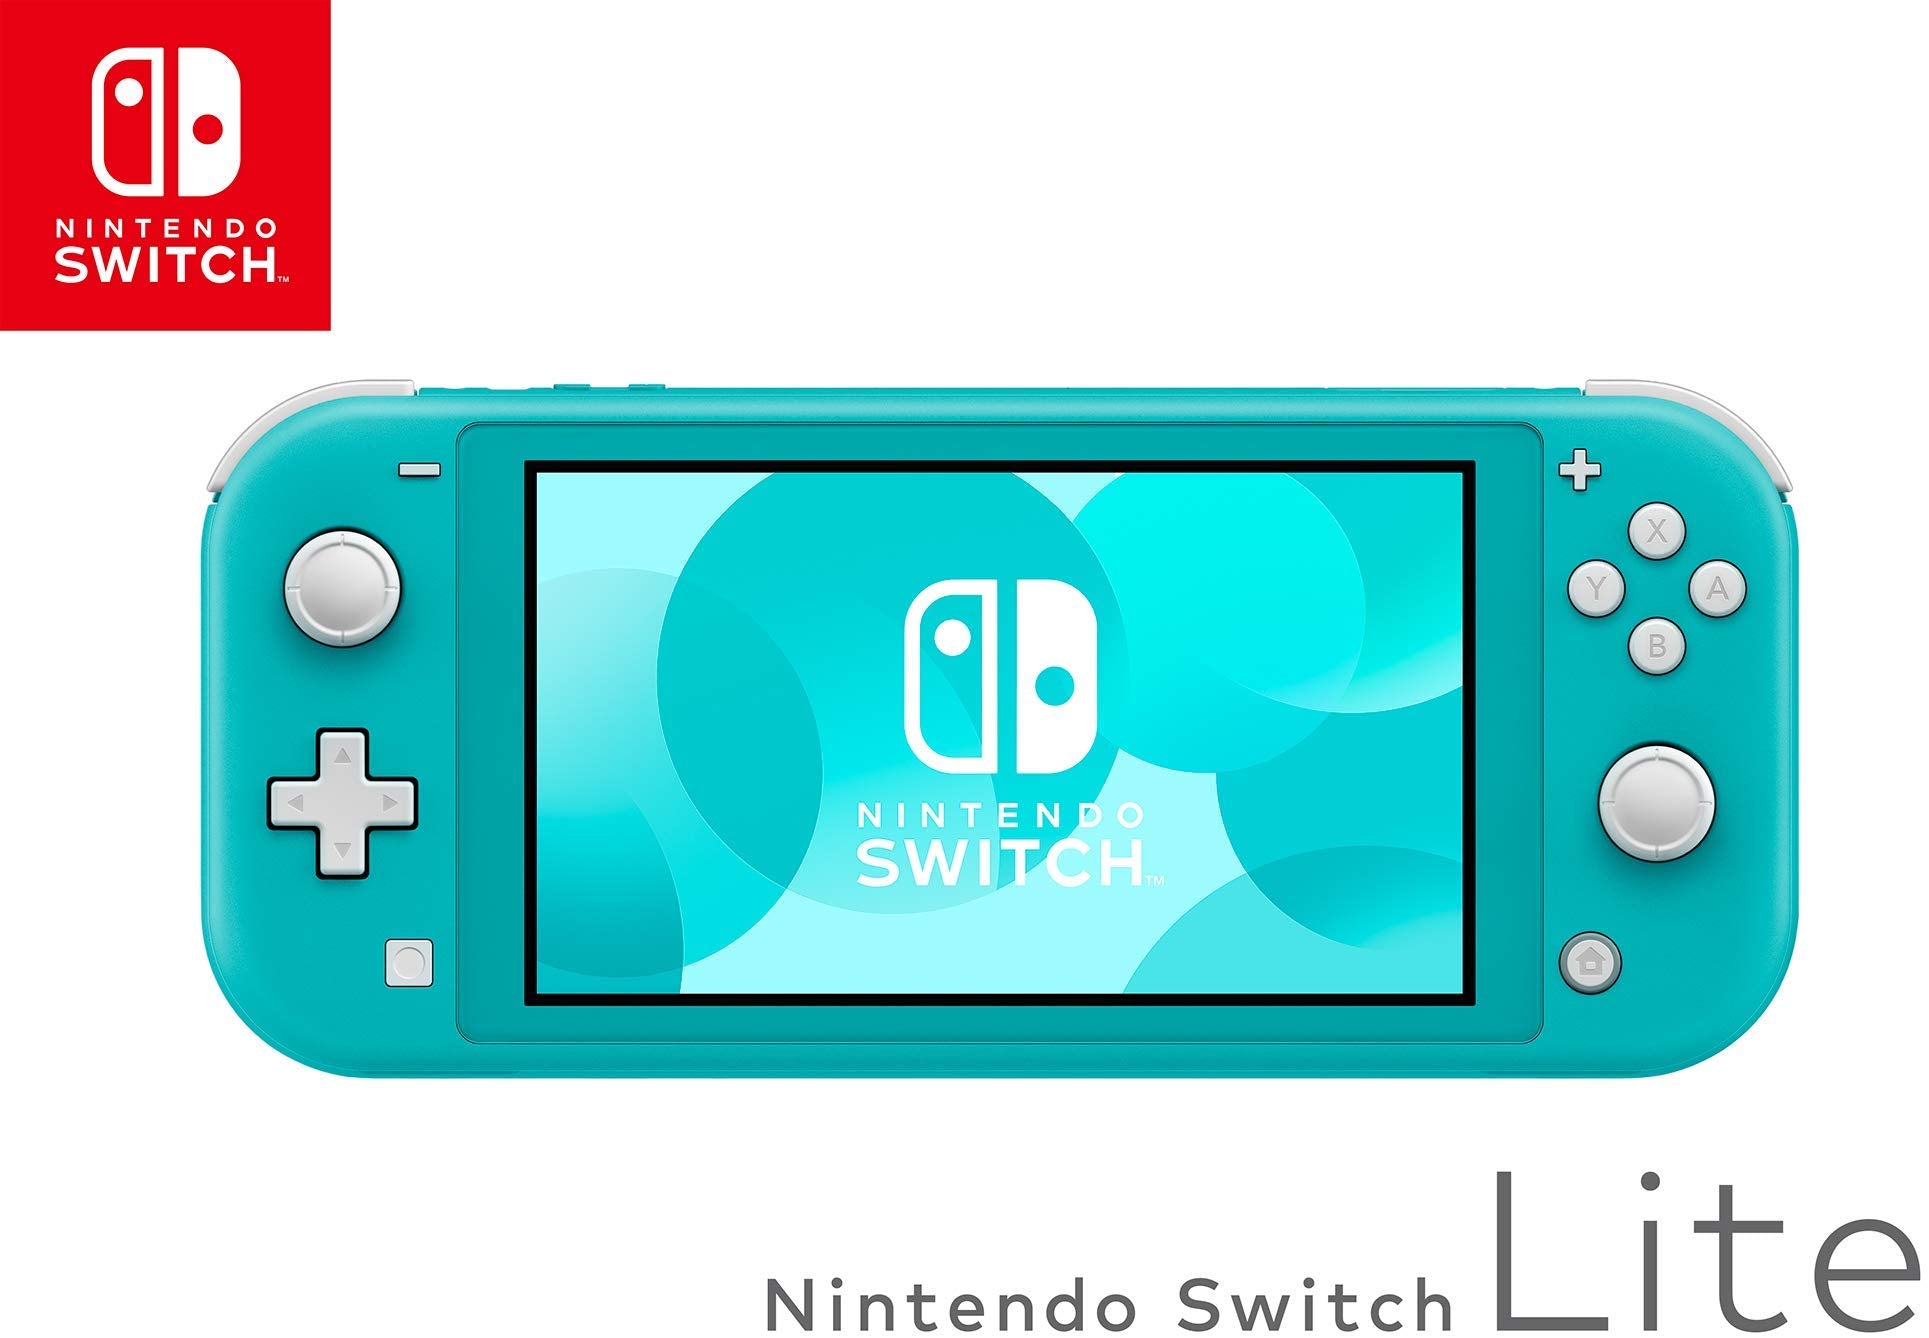 Nintendo Switch Lite 32GB Handheld Video Game Console - Turquoise - Pro-Distributing